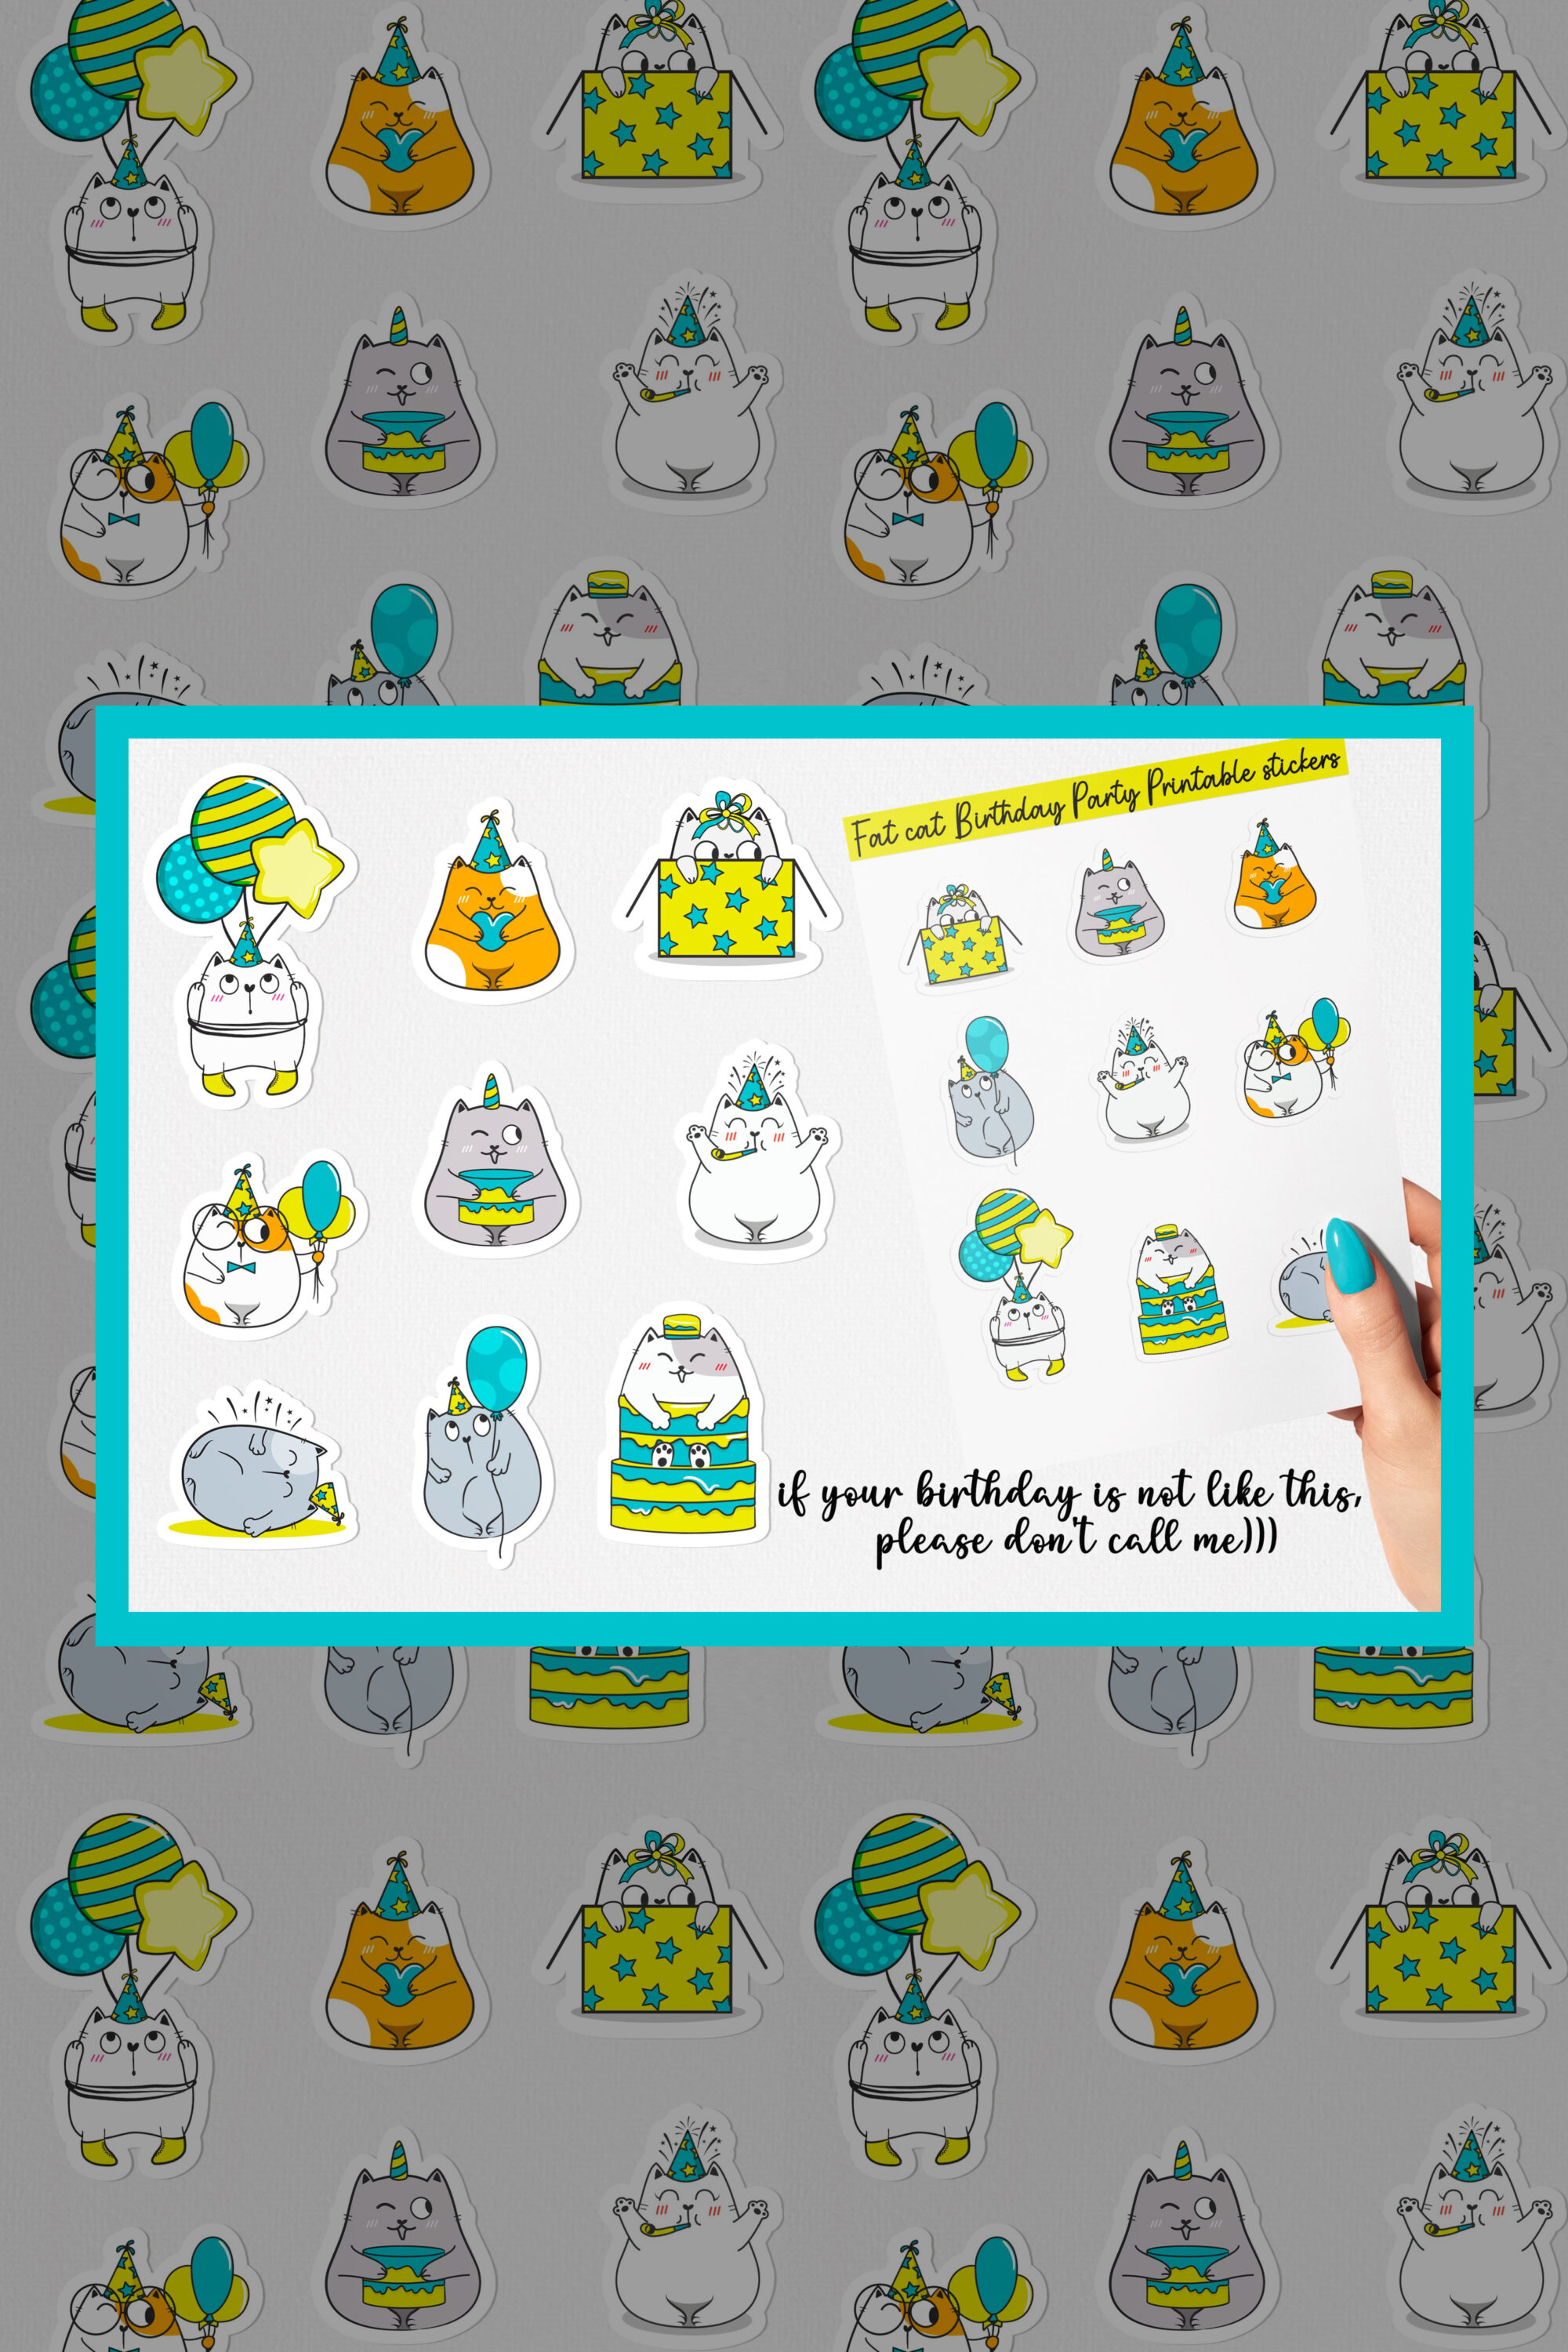 Fat cat birthday party printable stickers of pinterest.